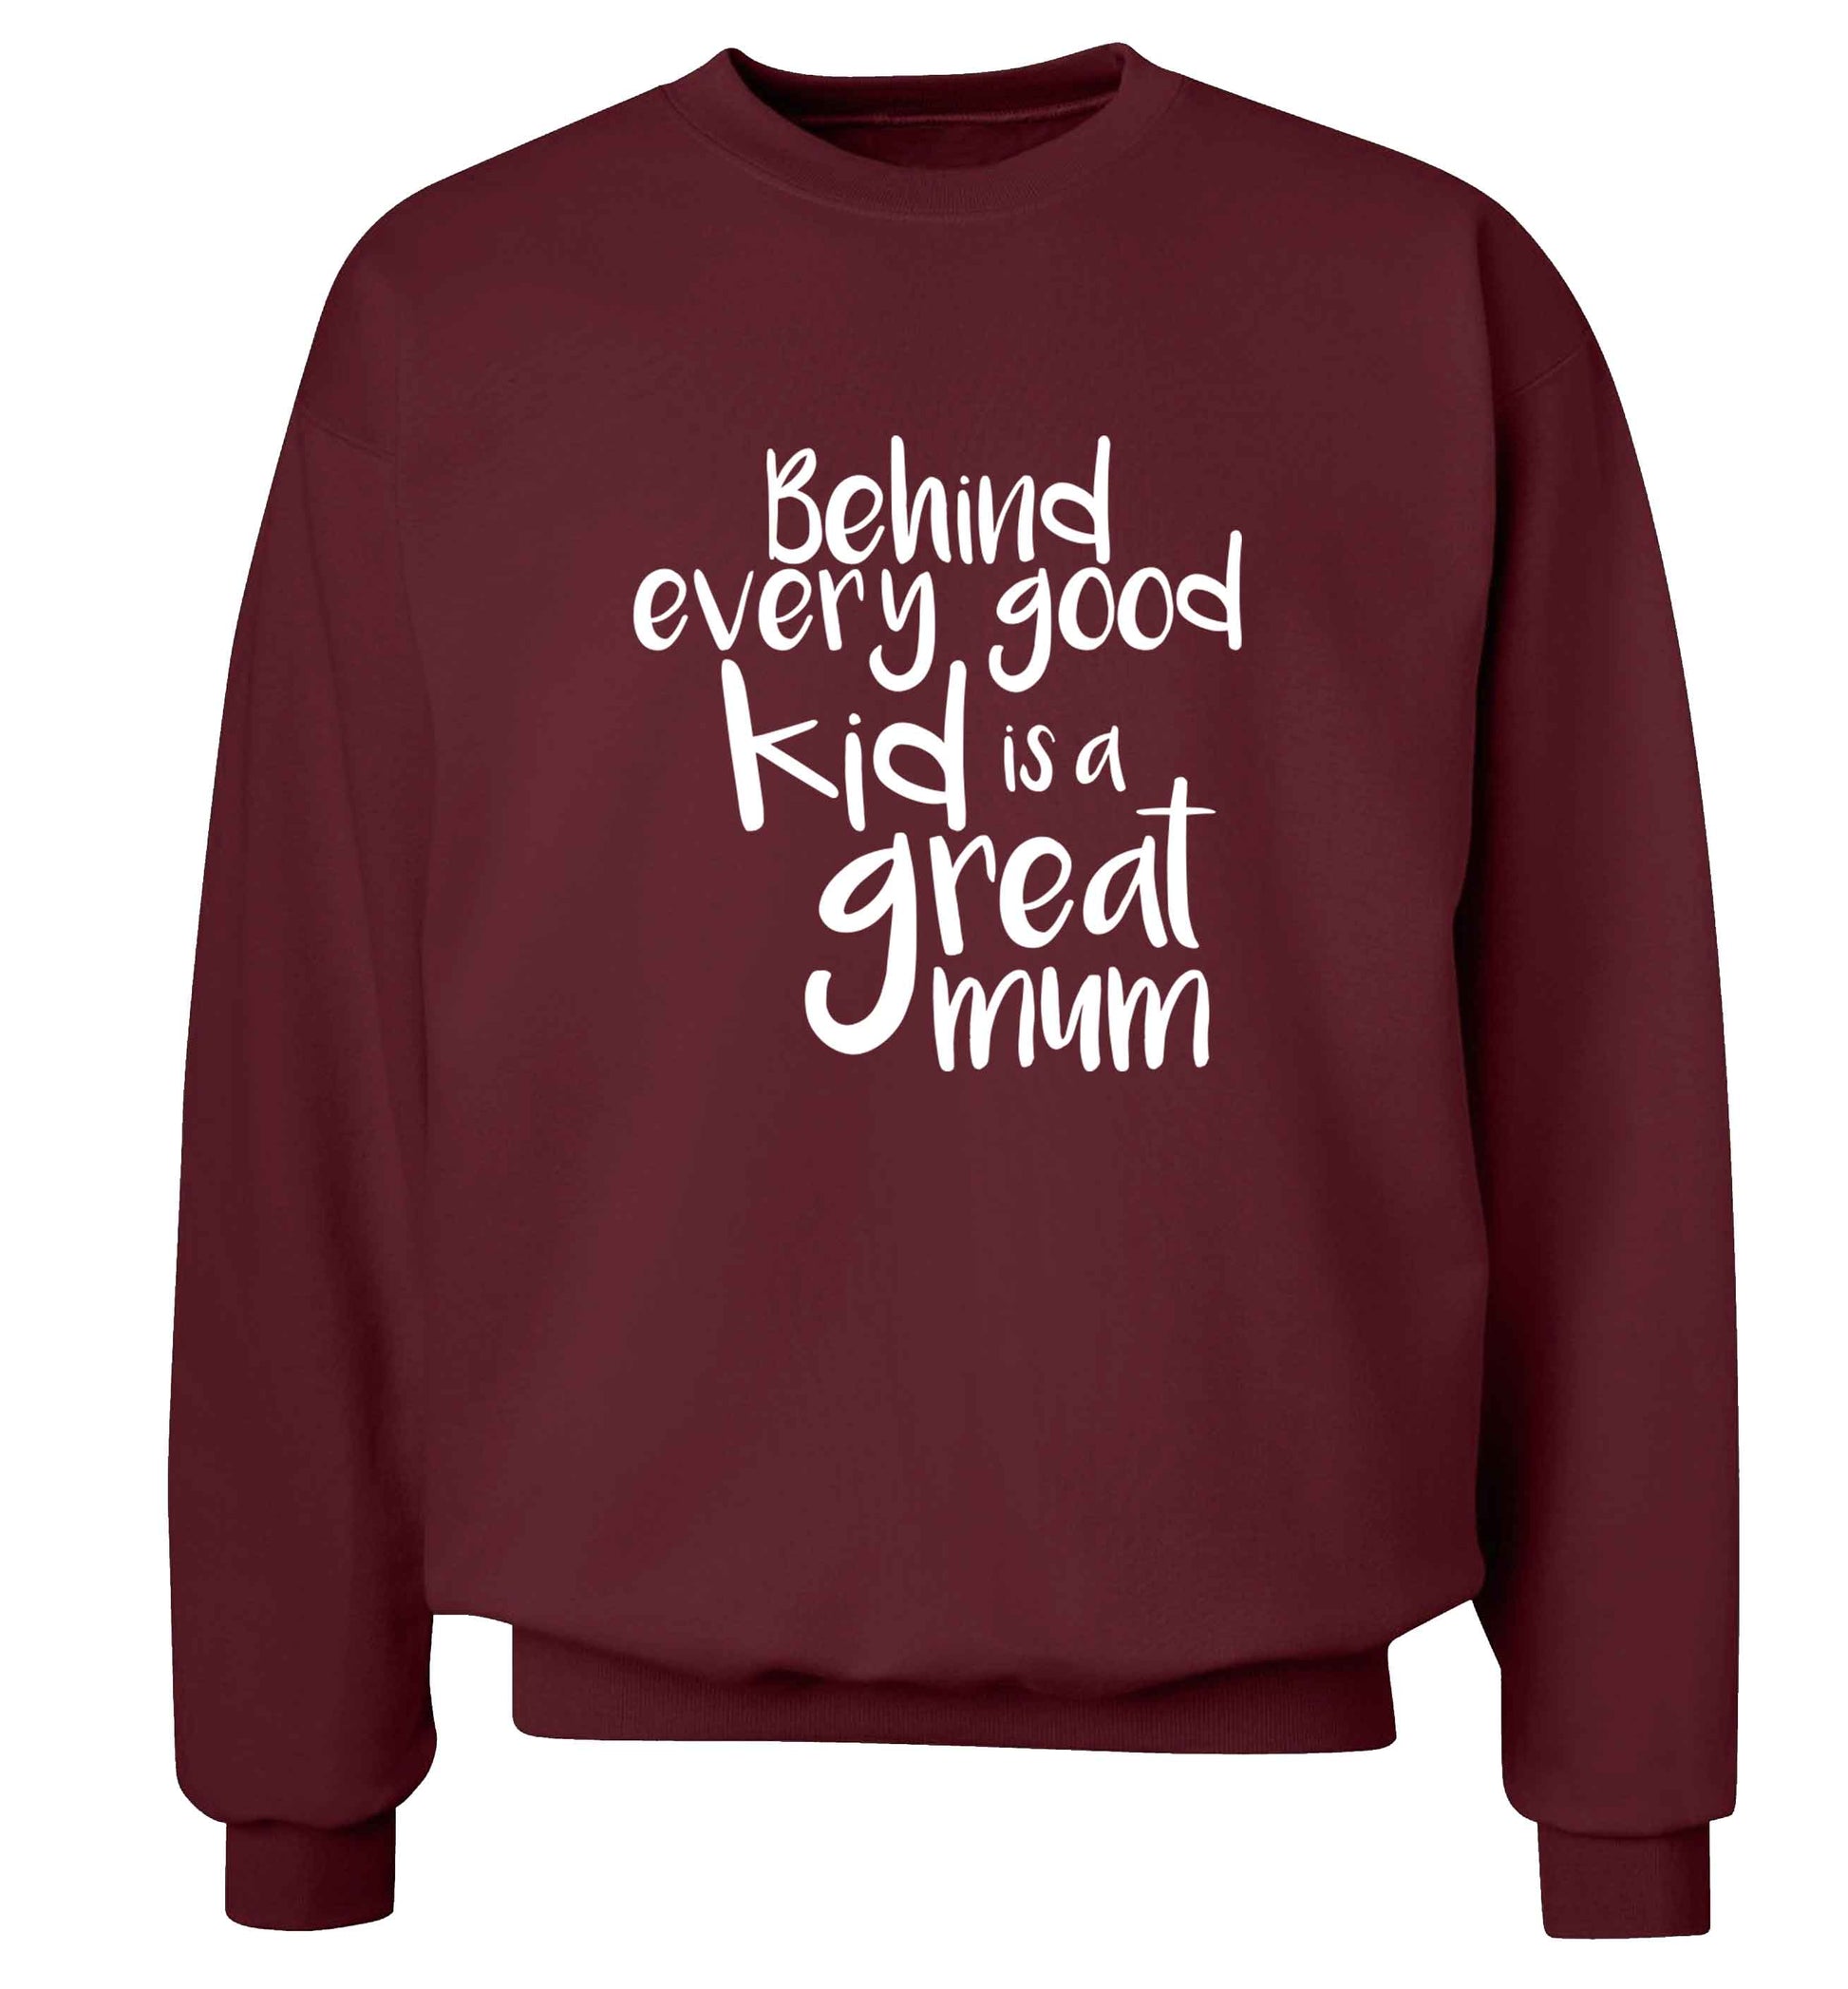 Behind every good kid is a great mum adult's unisex maroon sweater 2XL